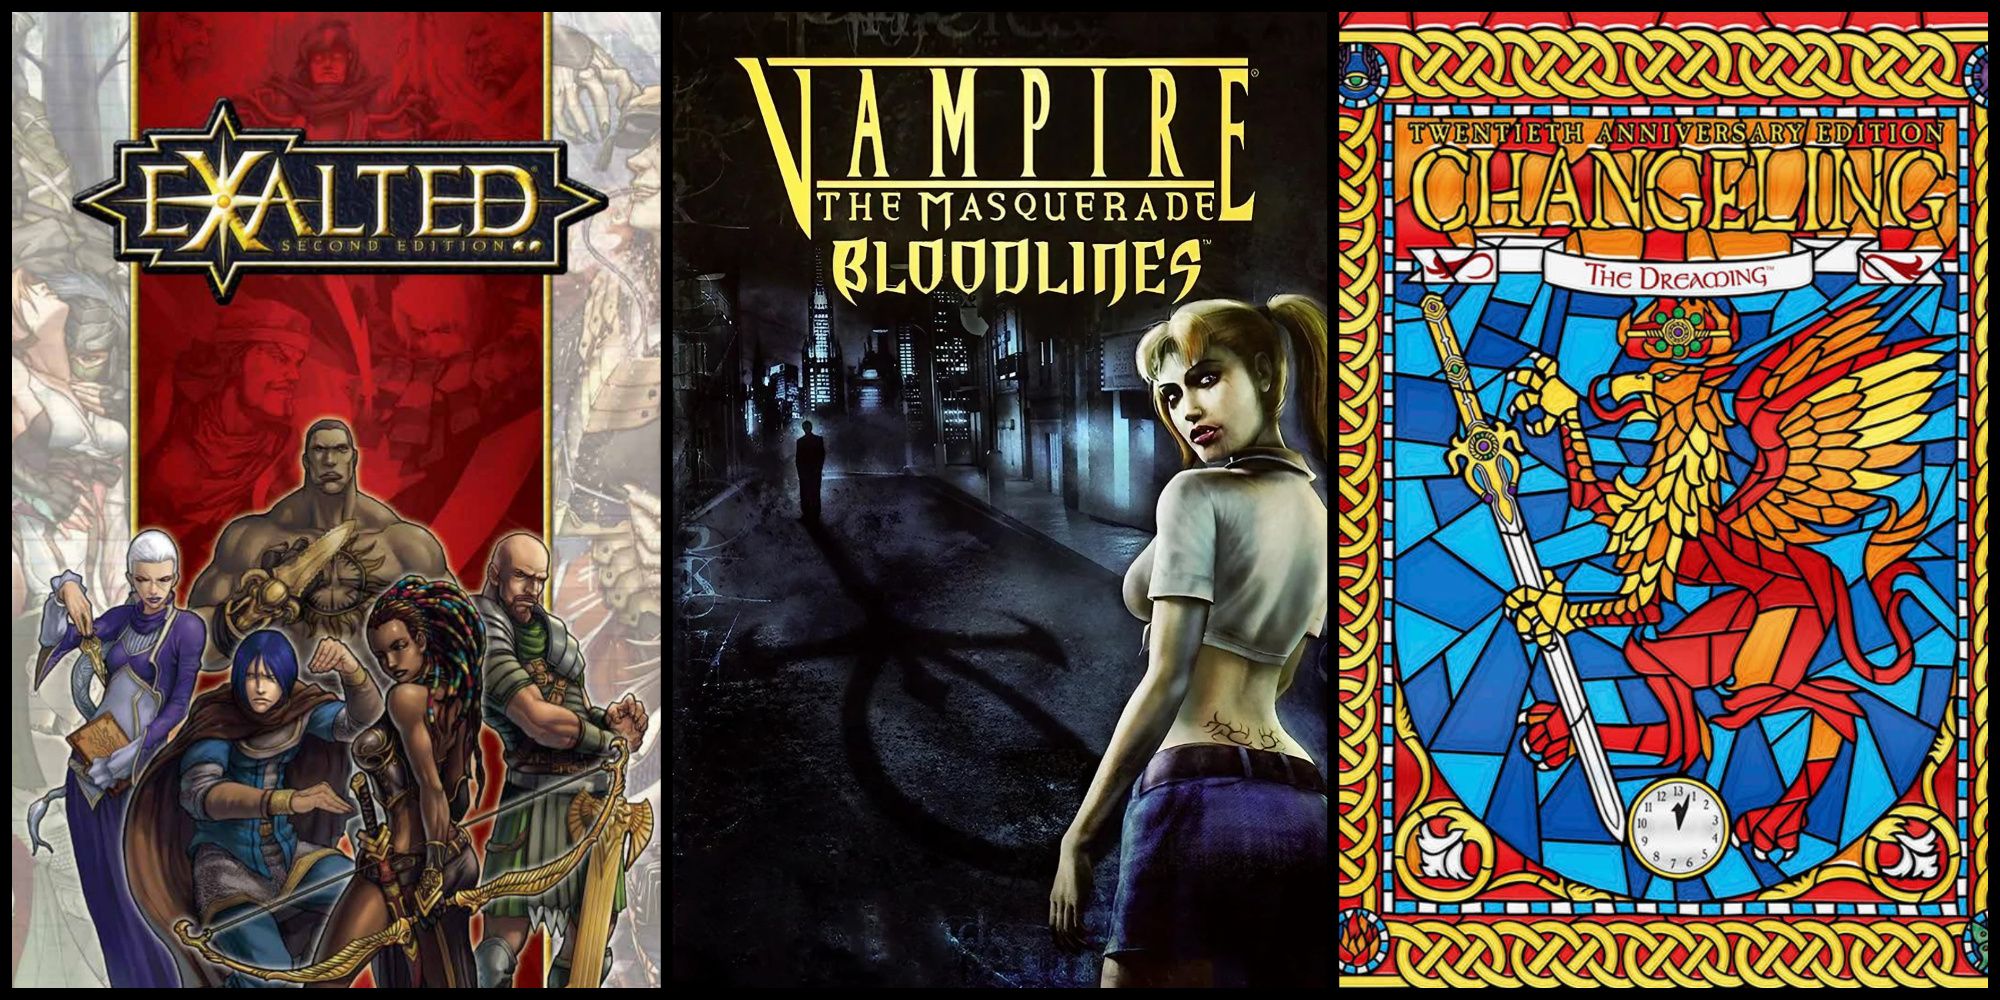 Vampire the Masquerade - Bloodlines: A Timeless RPG Experience